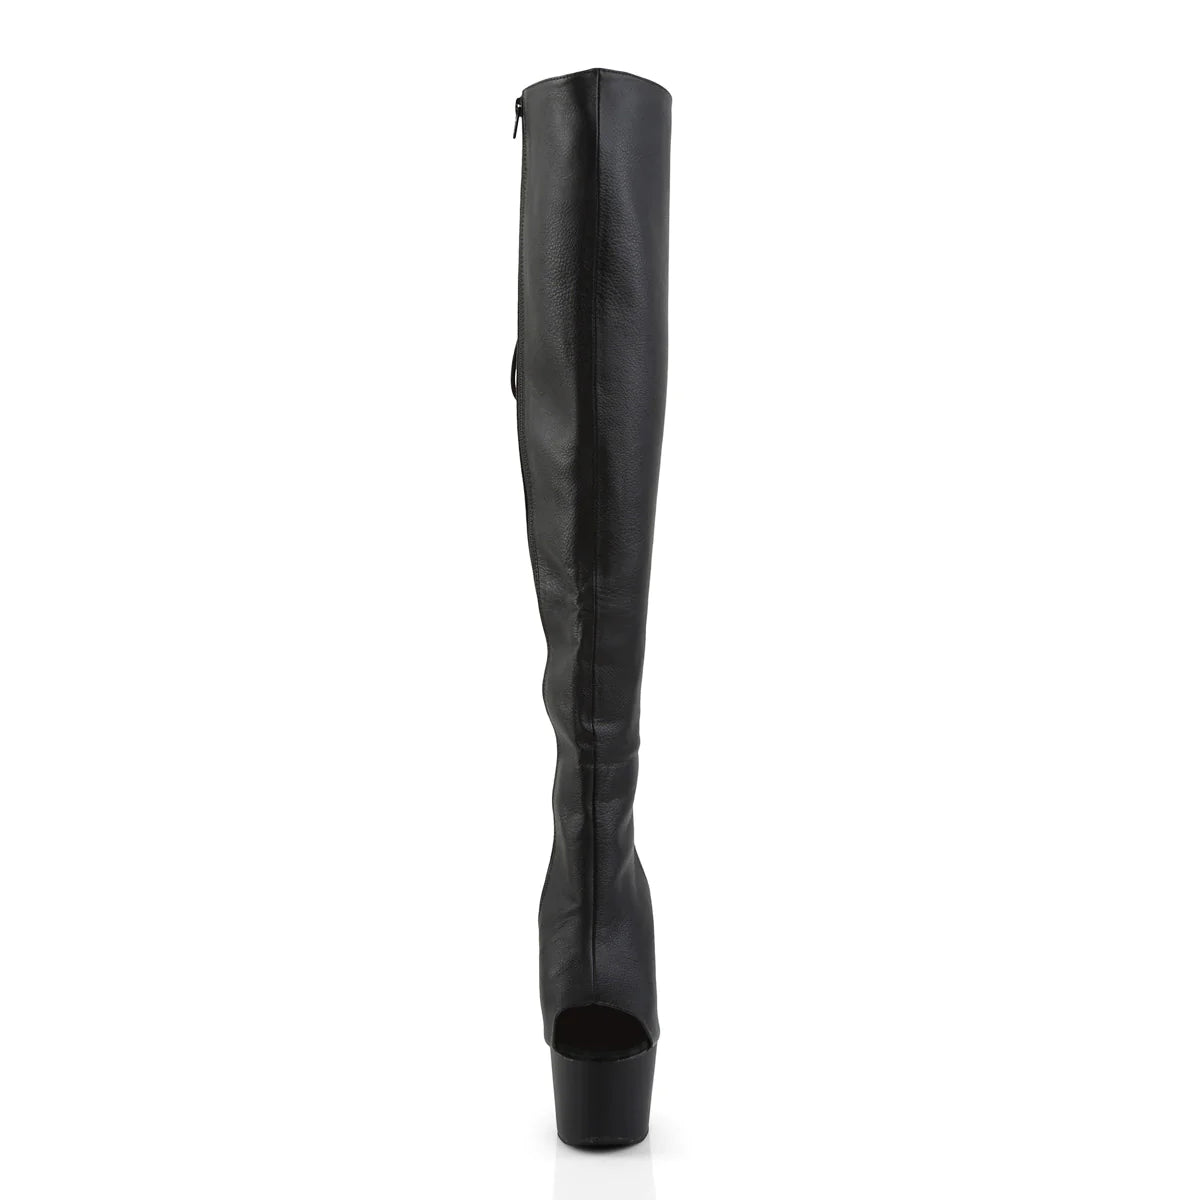 The front of the 7" Adore Thigh High Rear Lace Open Toe Boot.